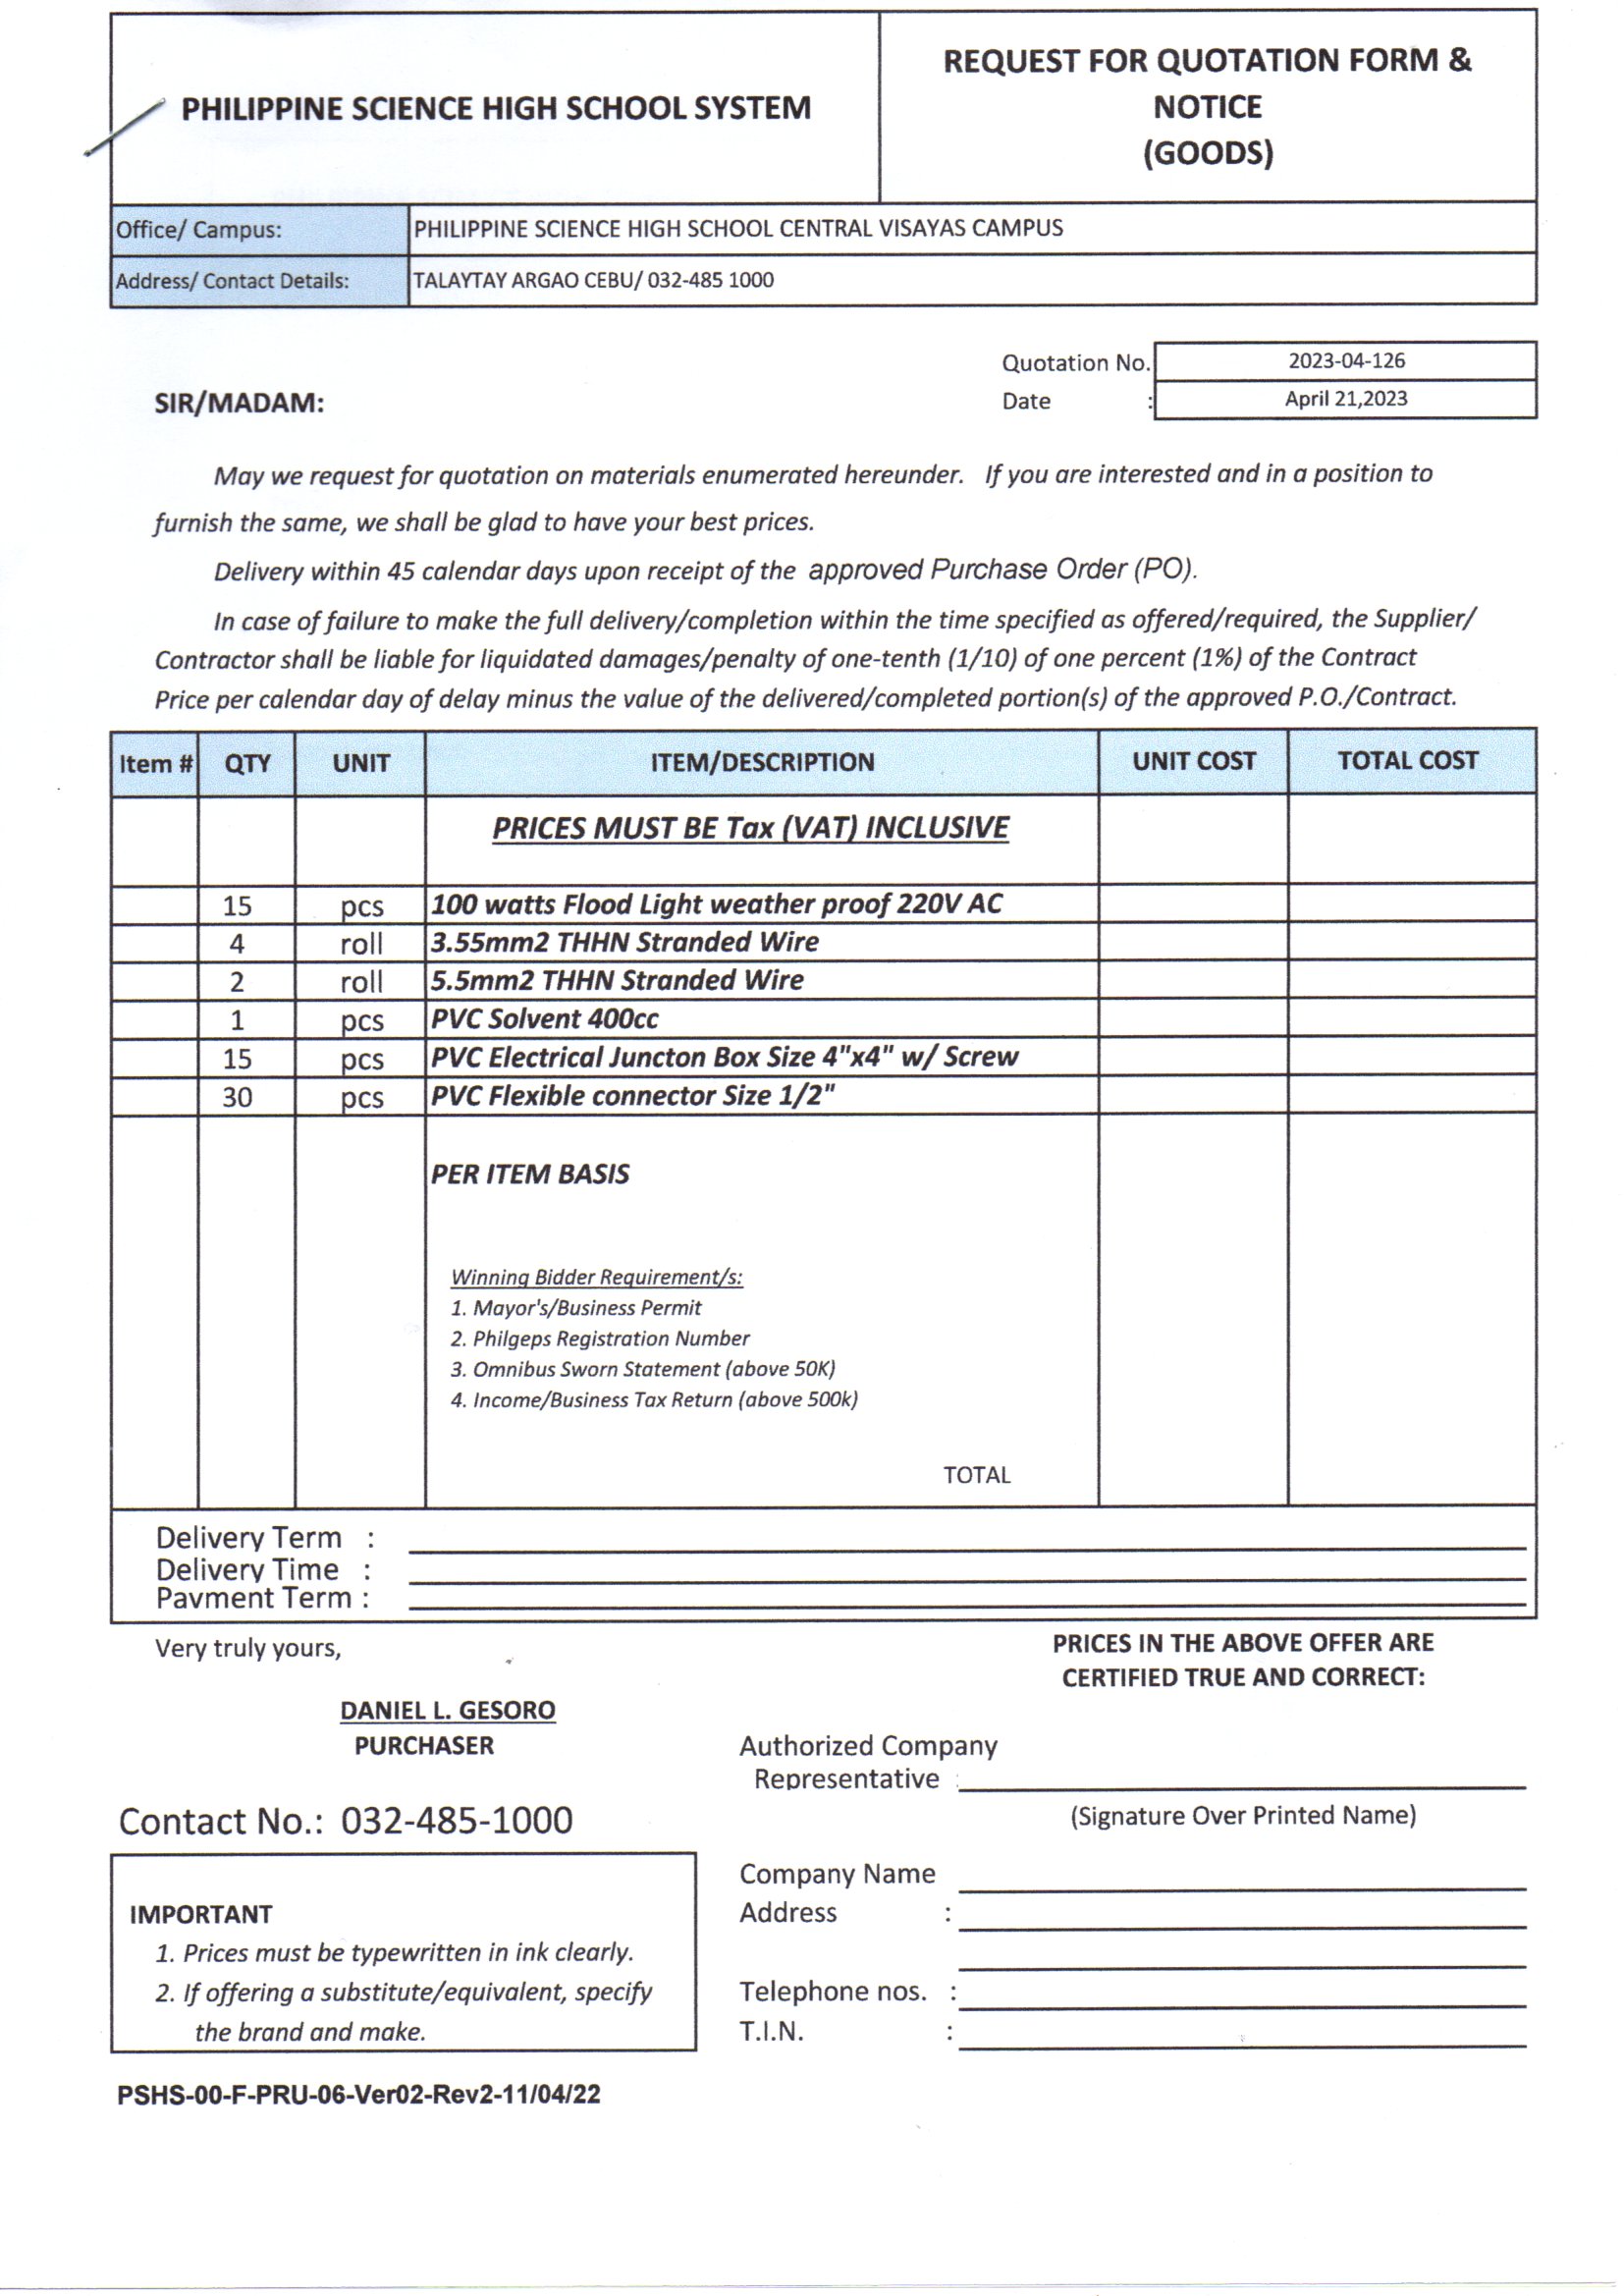 RFQ electrical materials and supplies p1of2